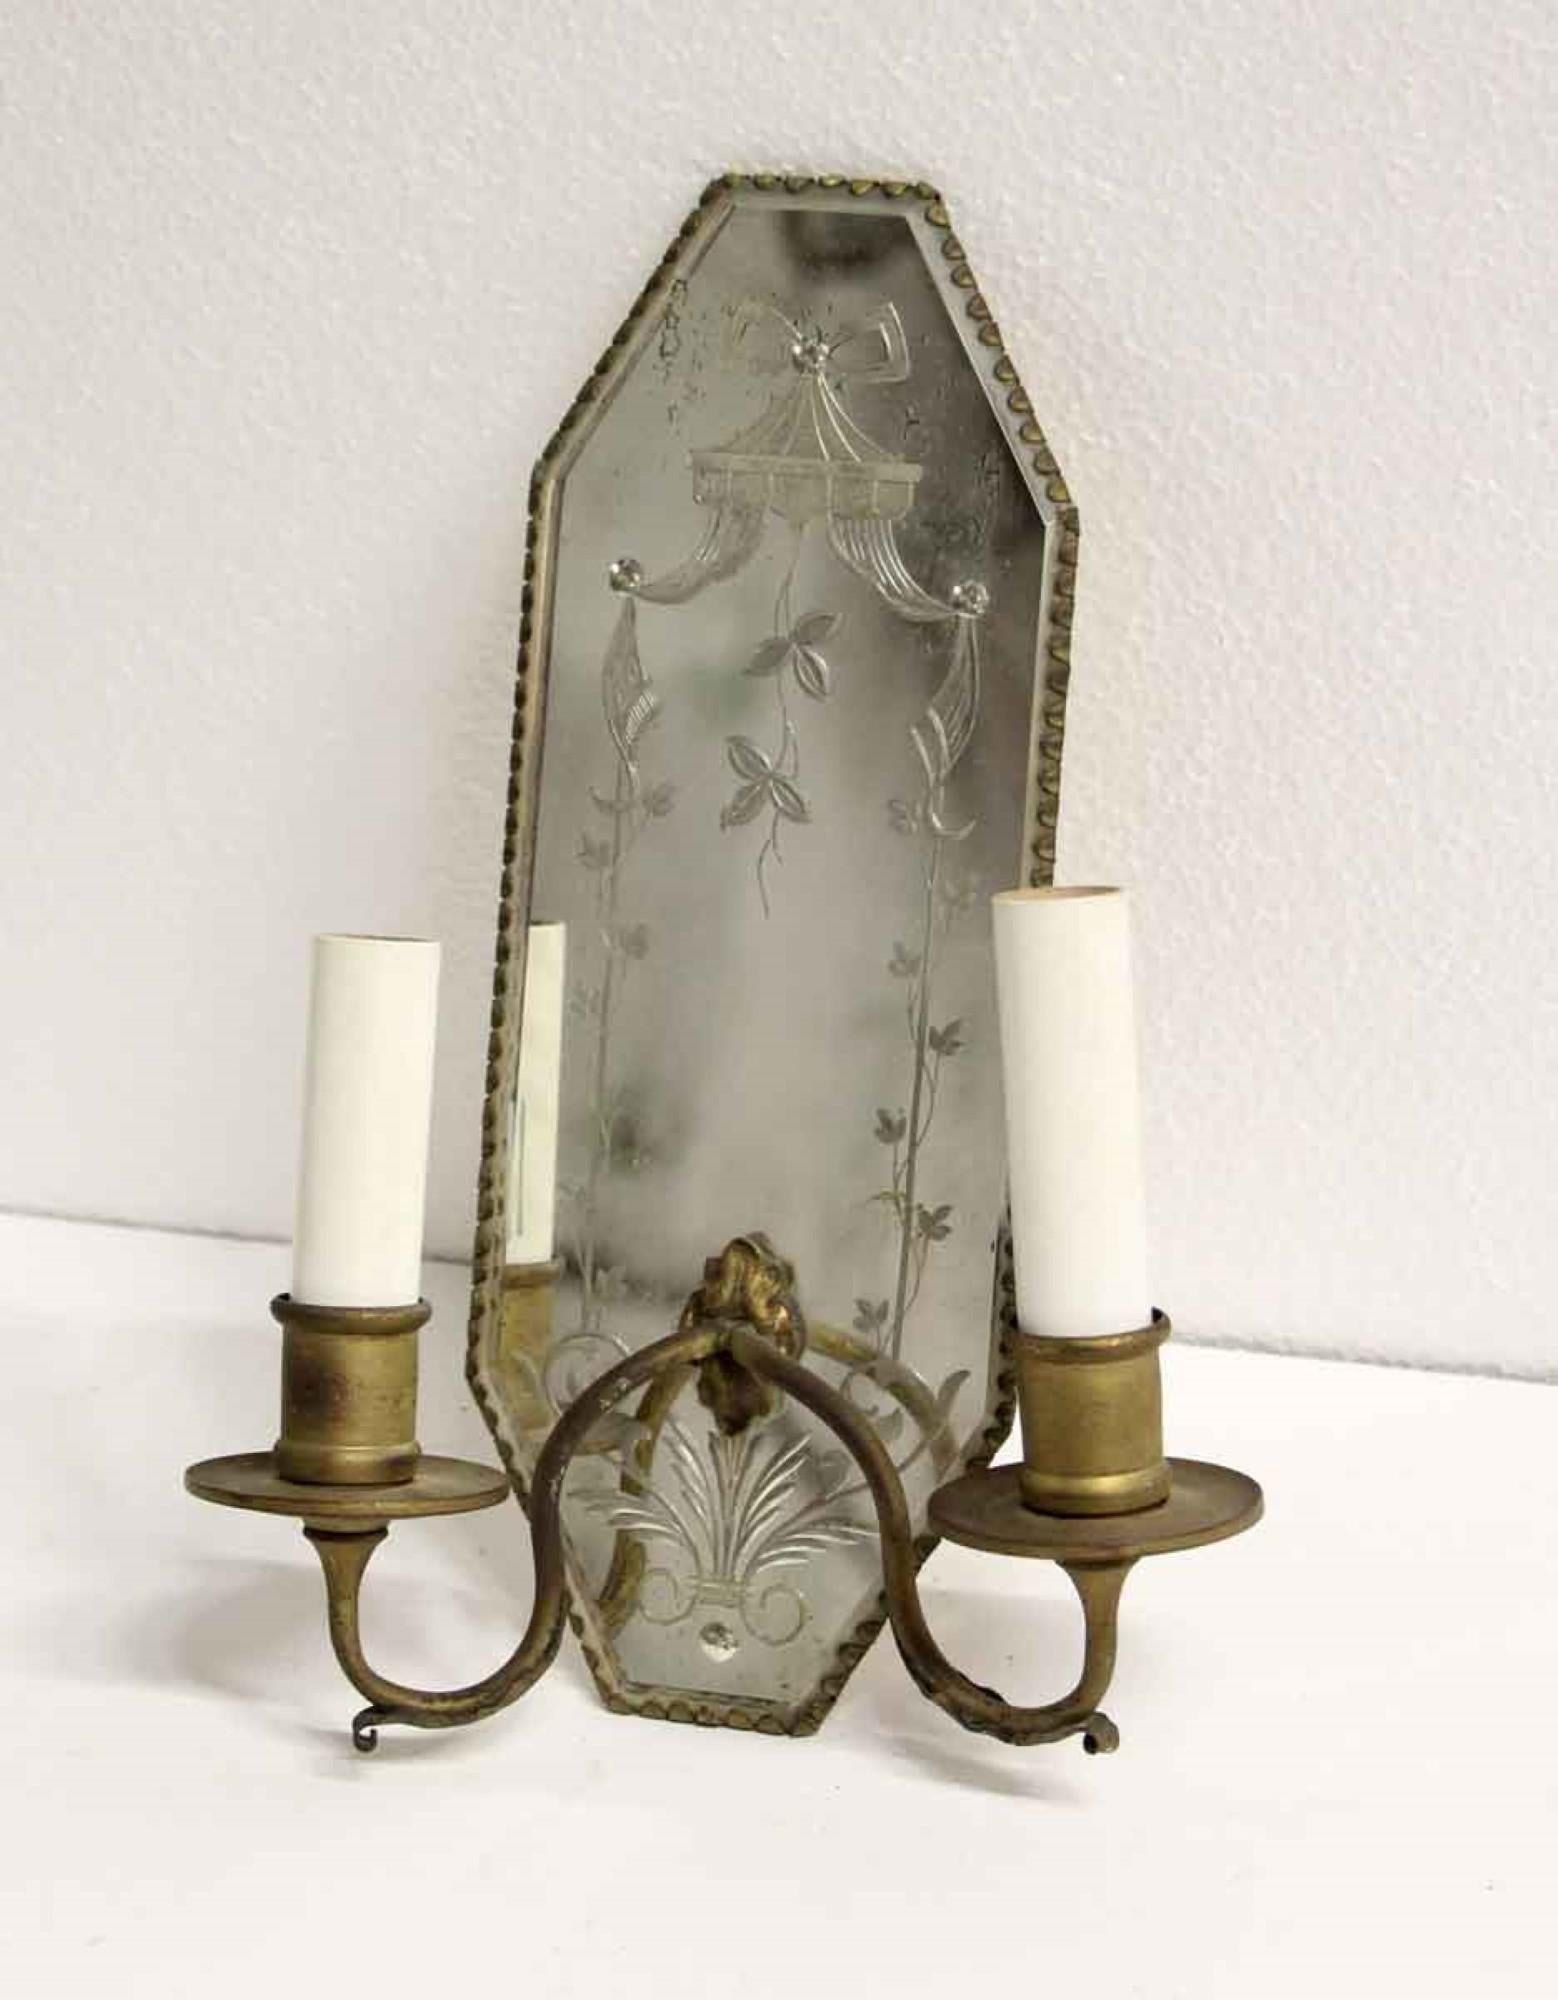 1930s brass French sconces featuring etched mirrored back plates. Two arms each. This can be seen at our 400 Gilligan St location in Scranton, PA.